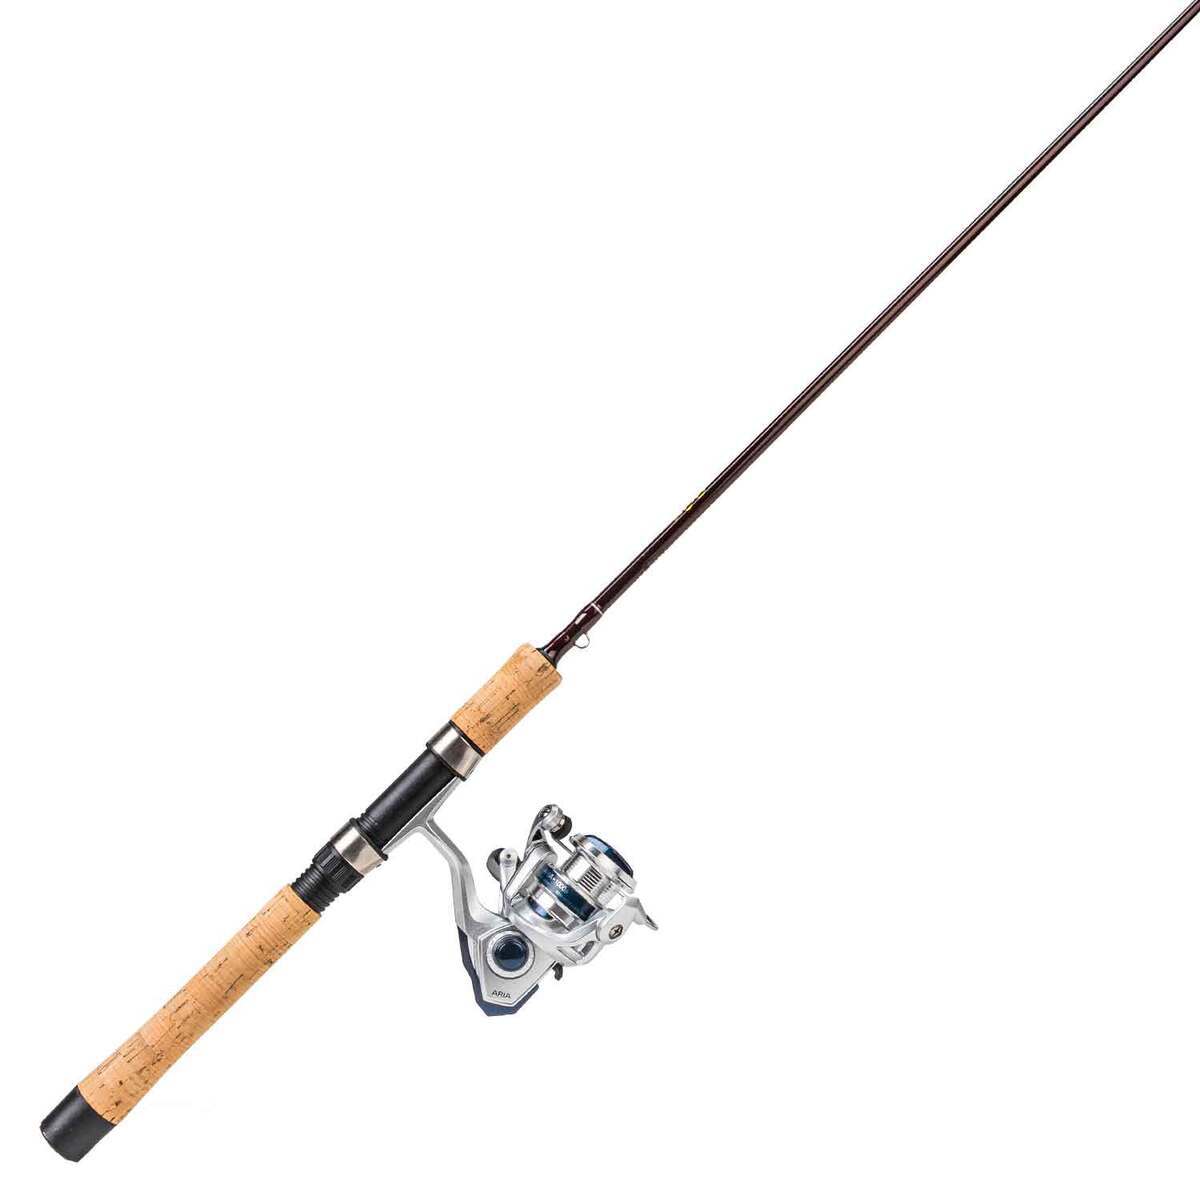 All Saltwater Ultra Light Fishing Rod & Reel Combos for sale